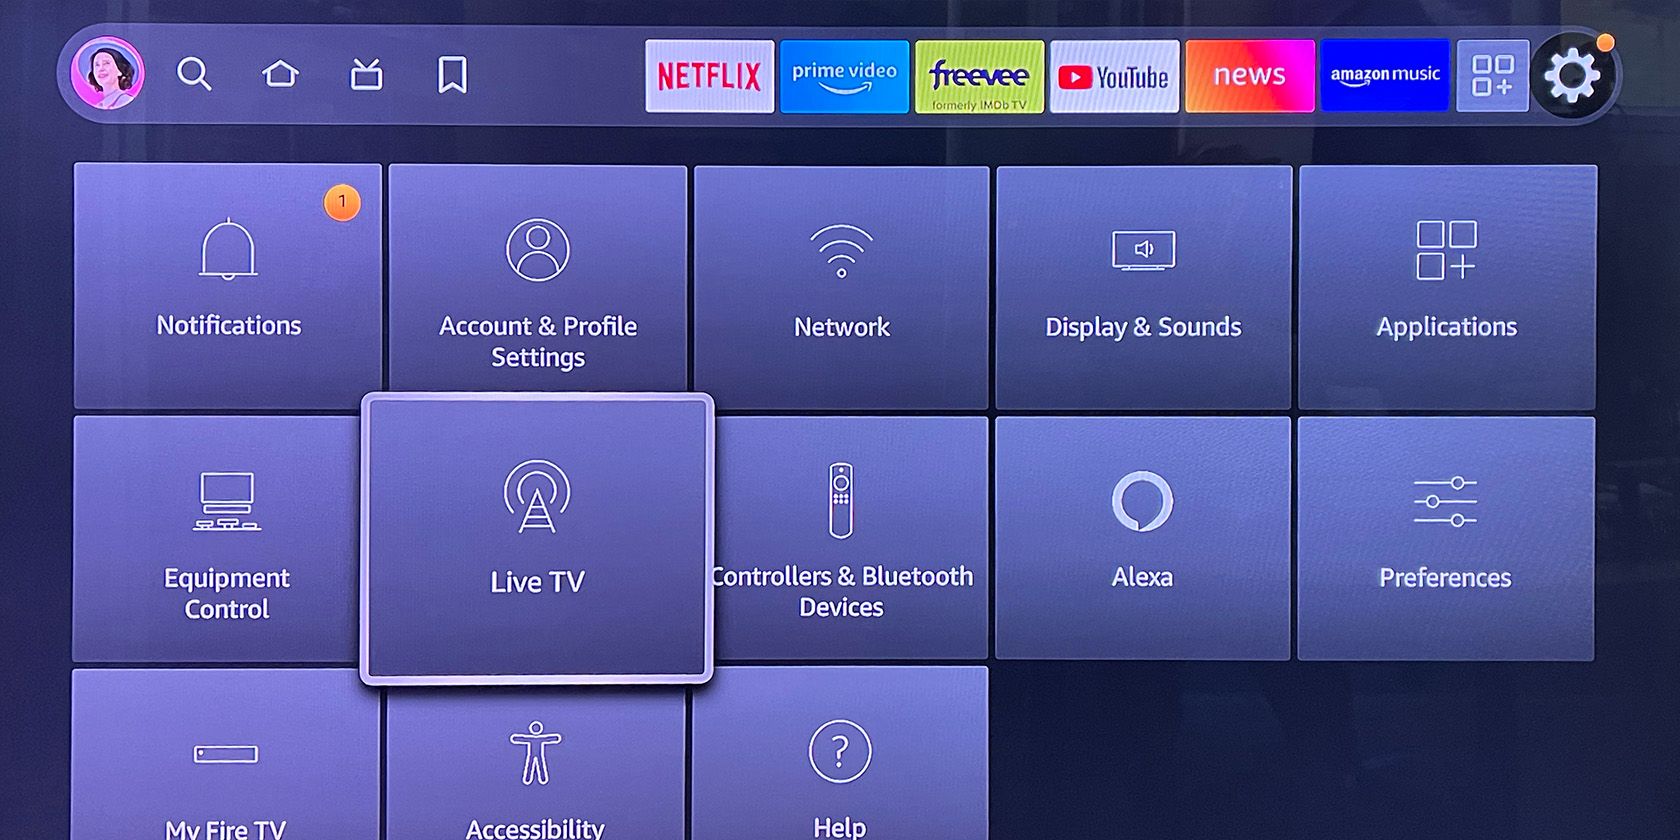 Go to the Fire Stick home screen and select Settings.
Scroll to the right and choose Device.